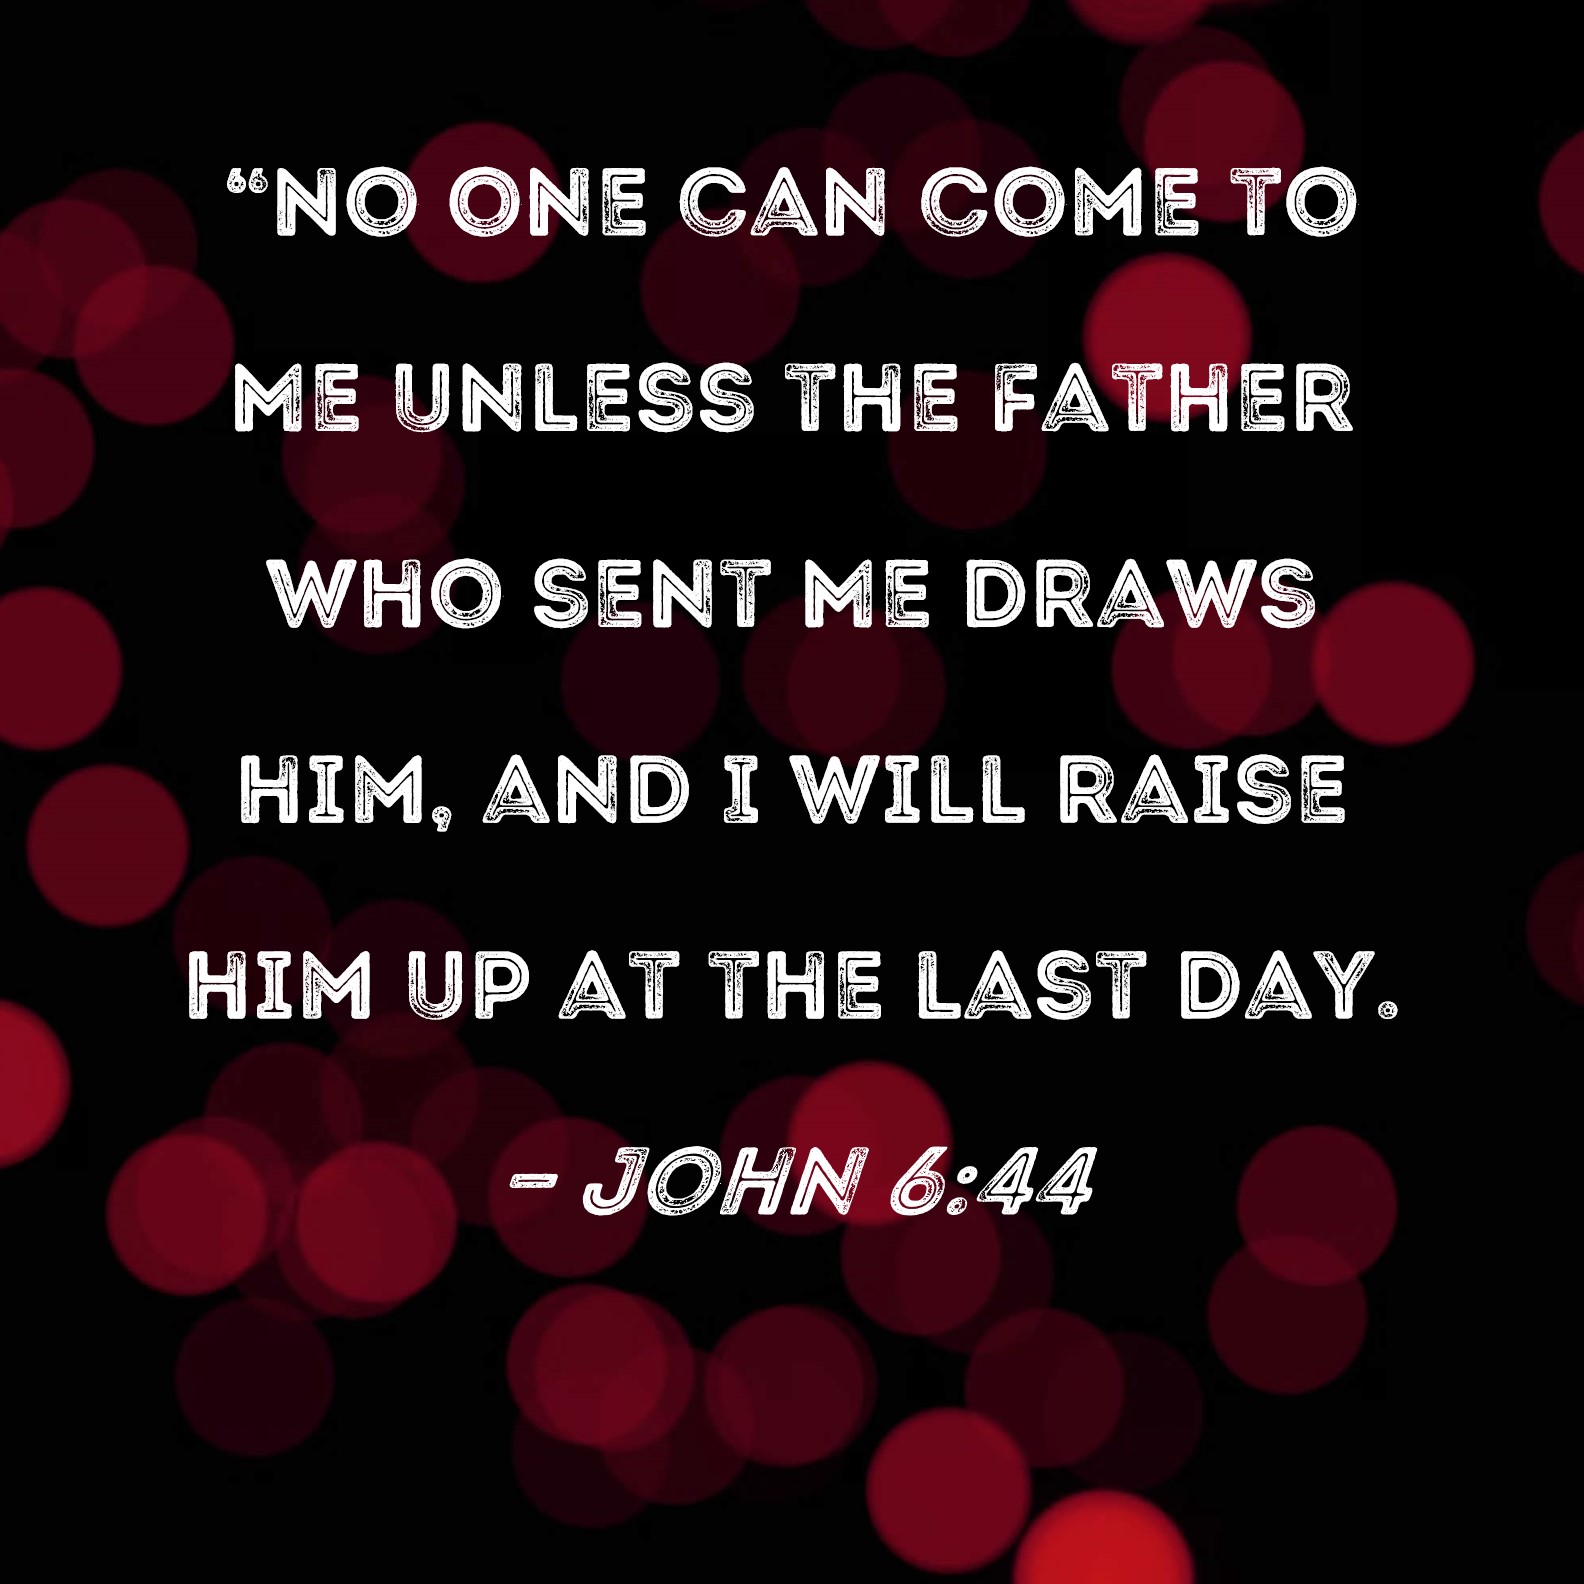 John 644 "No one can come to Me unless the Father who sent Me draws